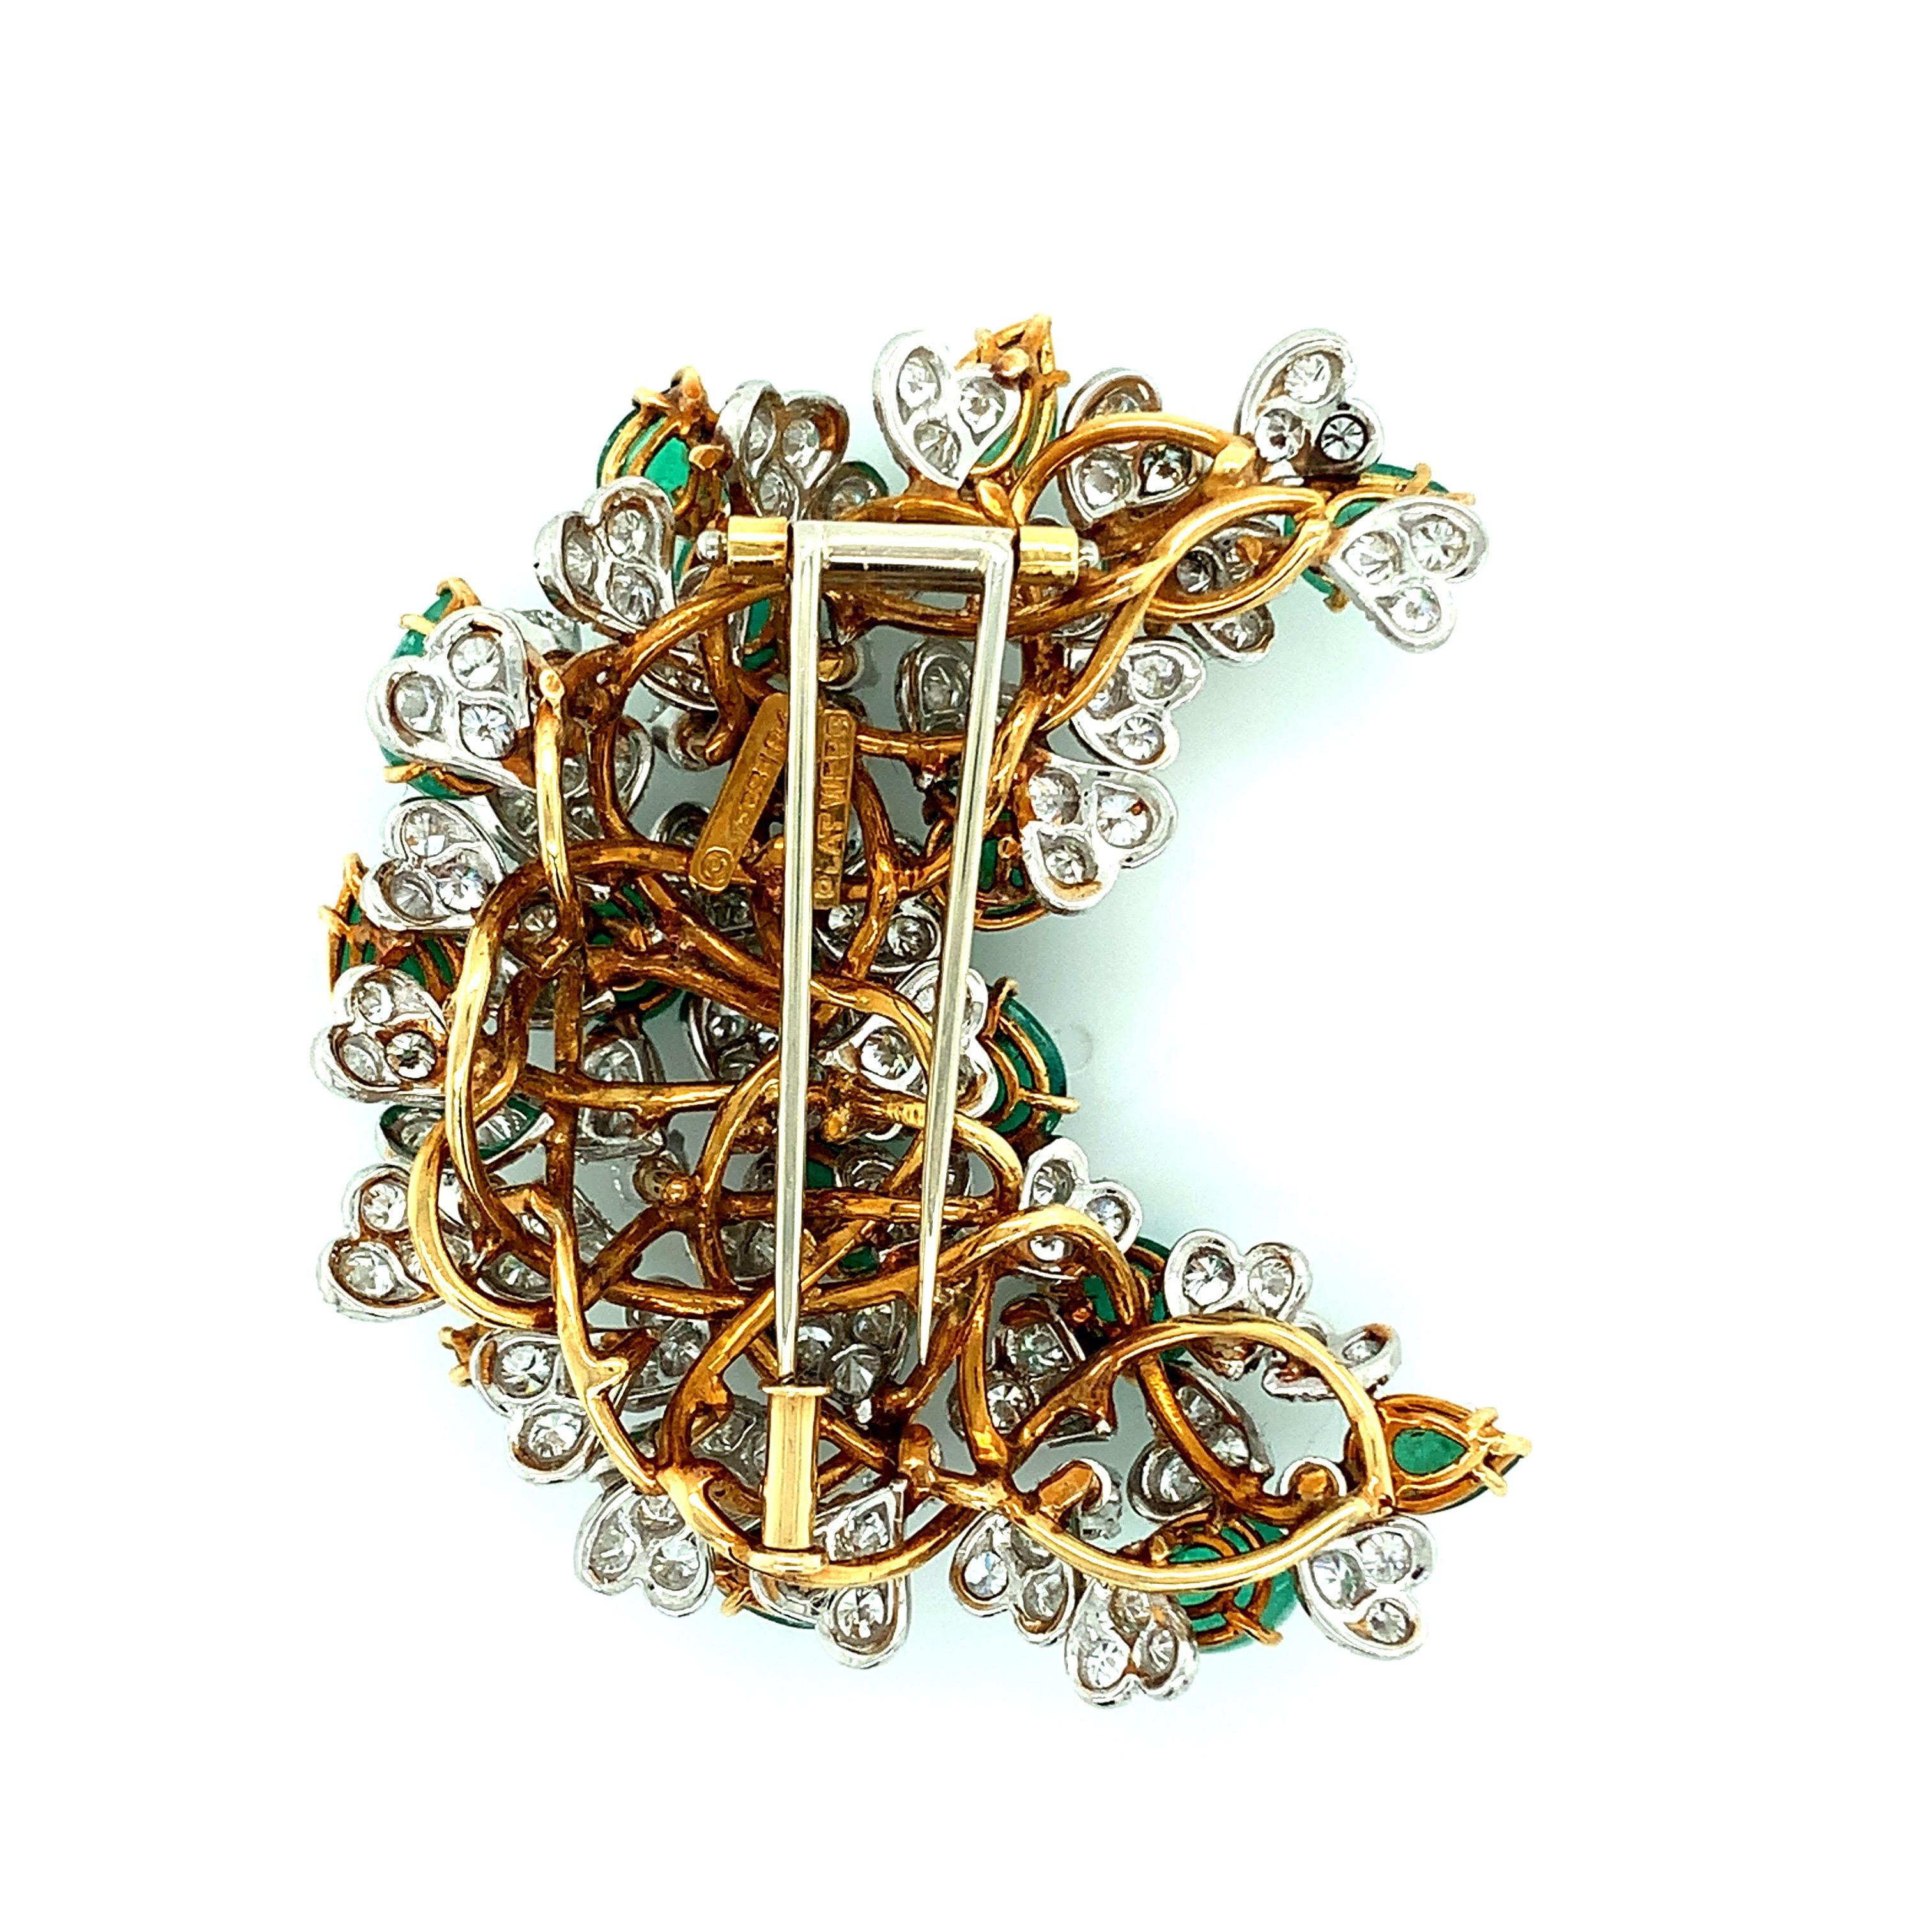 David Webb 18 karat yellow gold and platinum brooch featuring emeralds and diamonds. The emeralds weigh approximately 10 carats and the diamonds weigh approximately 6 carats. Marked: Webb 18K / Plat Webb. Total weight: 41.9 grams. Width: 2 inches.